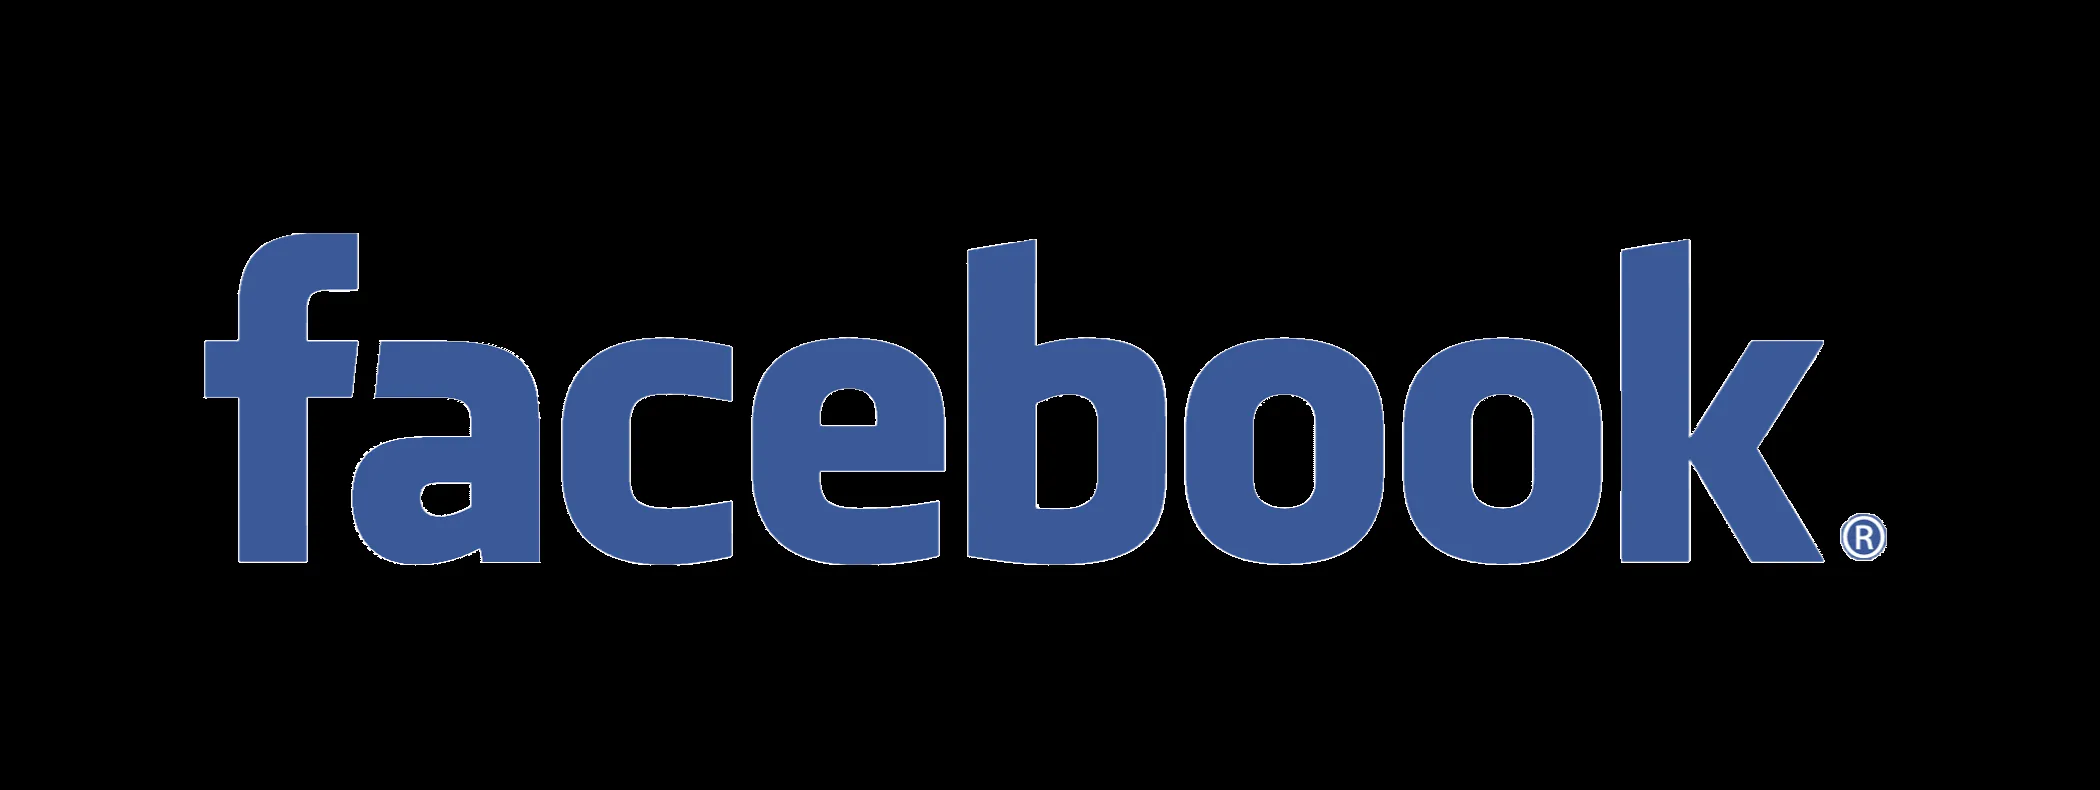 Images For > Facebook Images Png